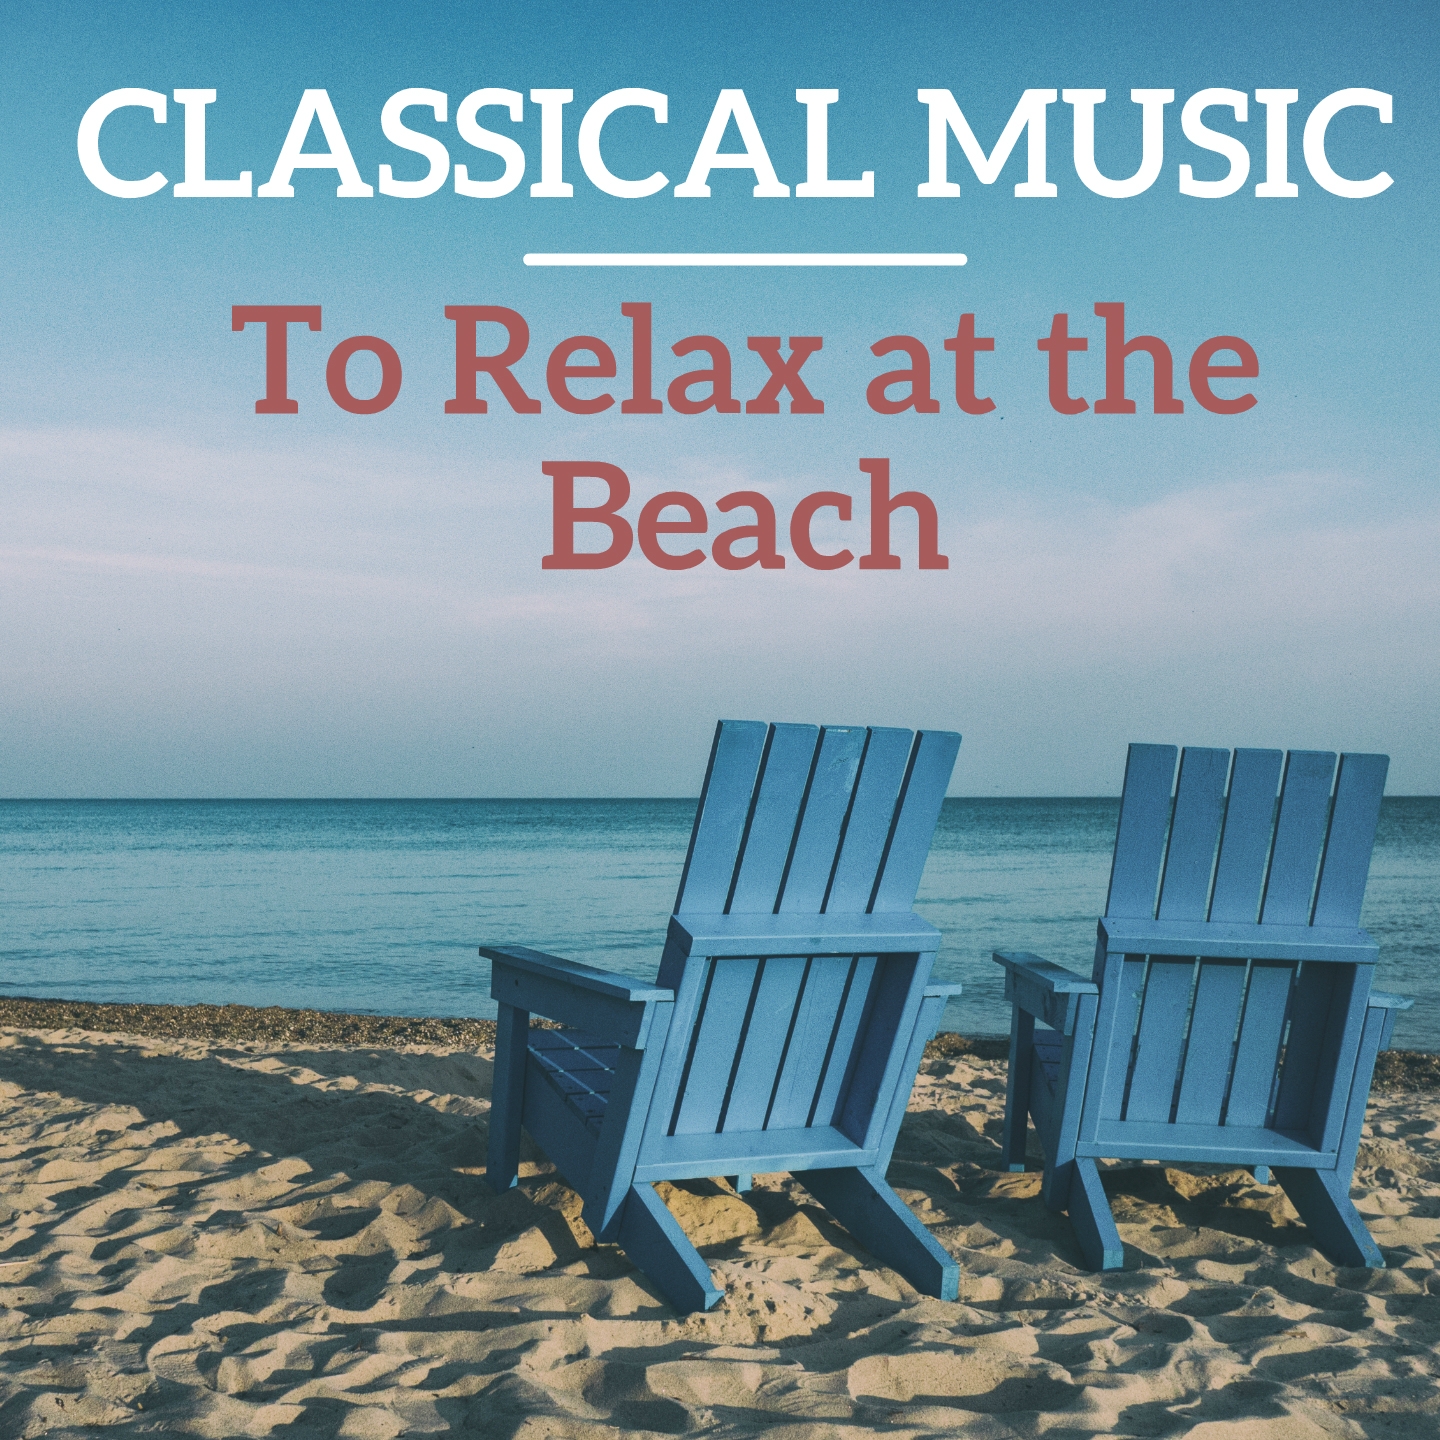 Classical Music to Relax at the Beach